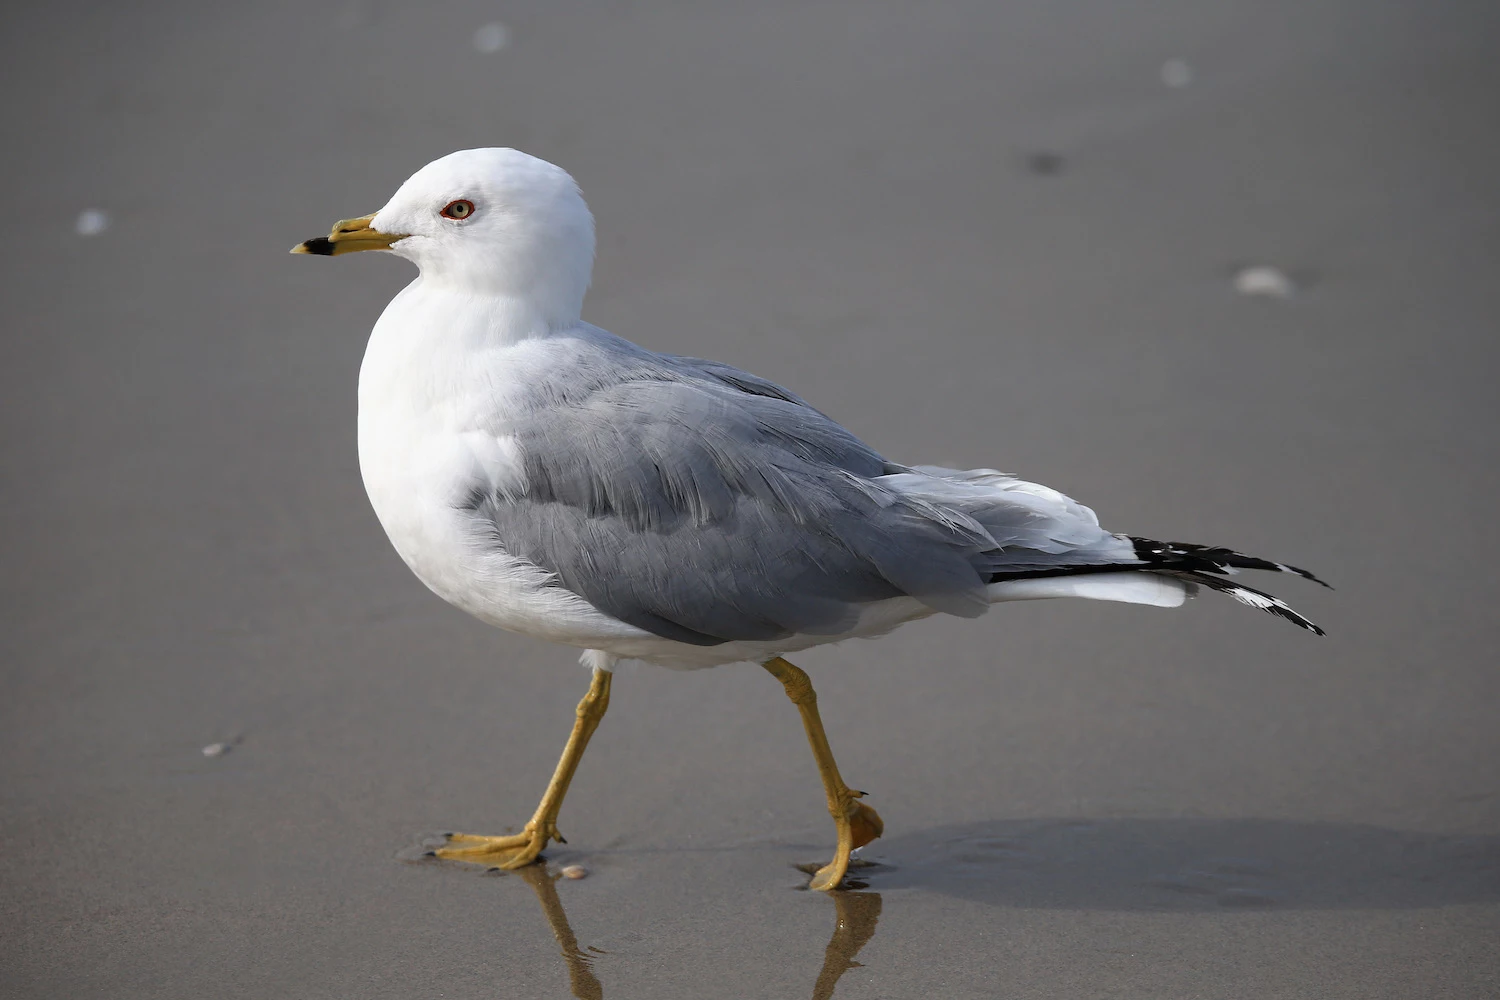 The 5 Seagulls You'll Find on New Jersey Beaches